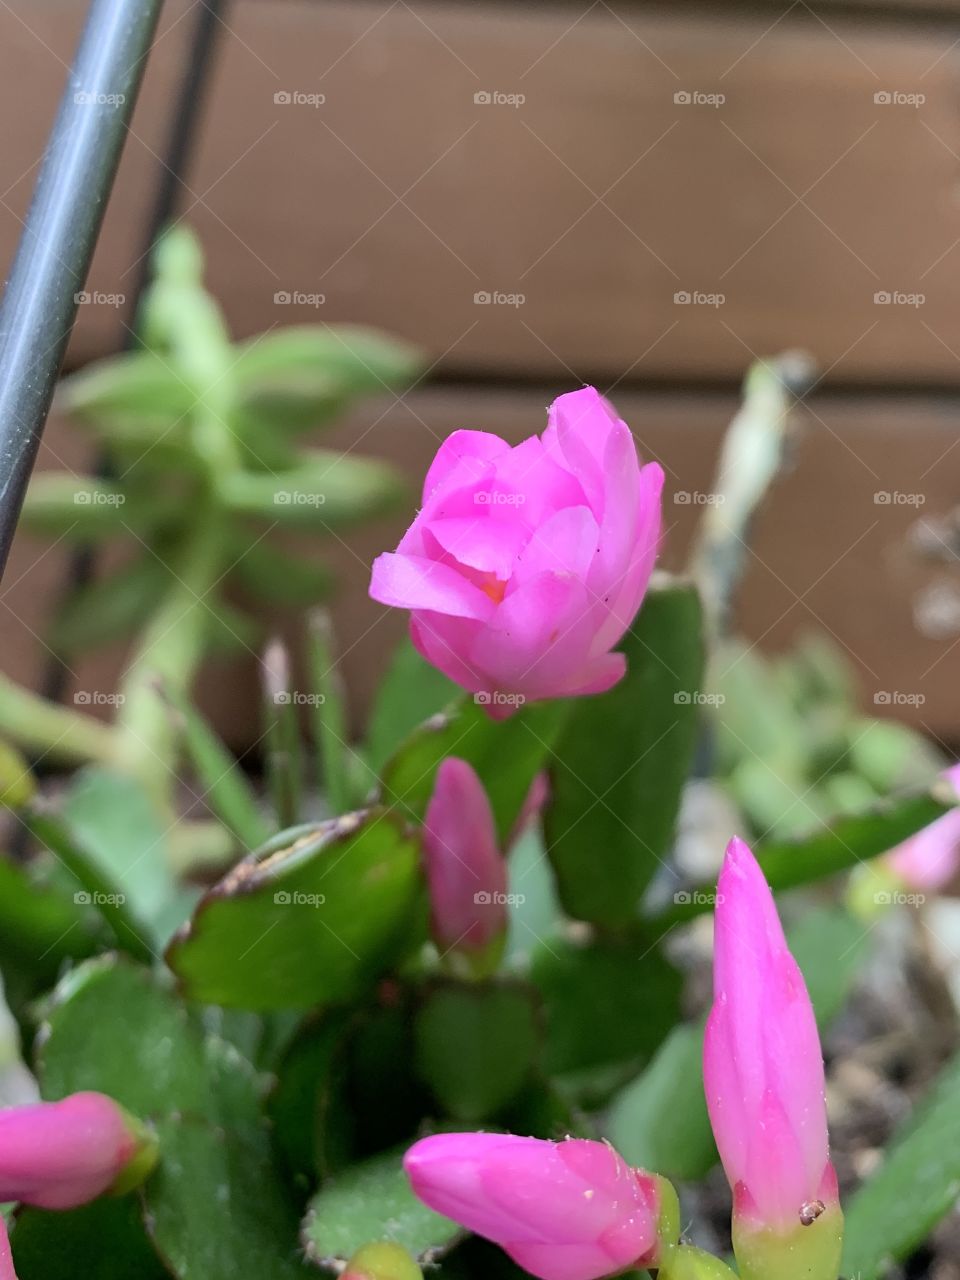 A pretty pink flower that is about to bloom